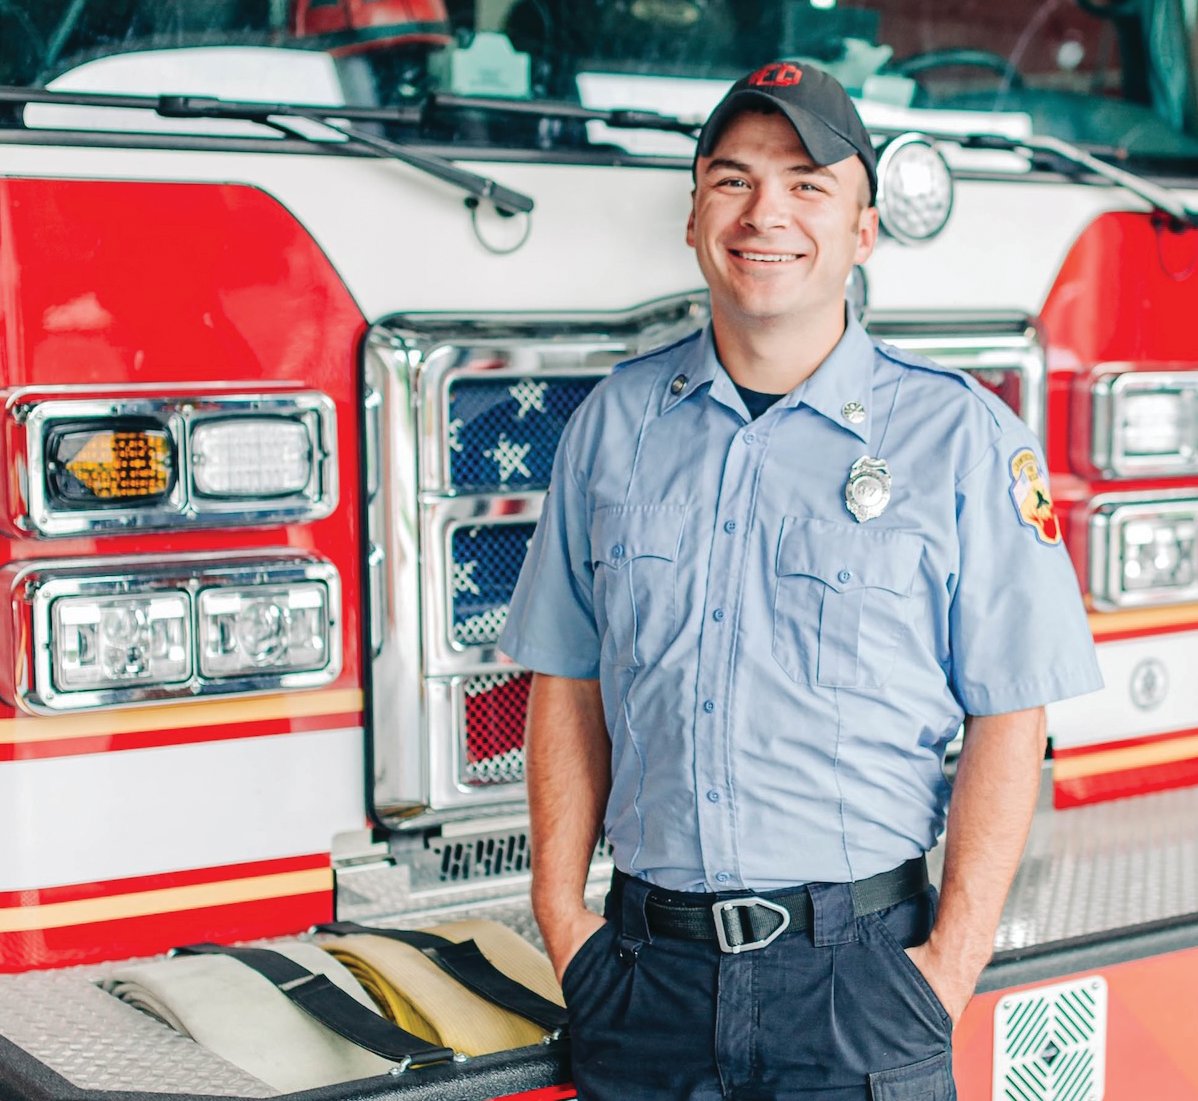 Kyle Hunt, firefighter/paramedic, with the Crawfordsville Fire Department.